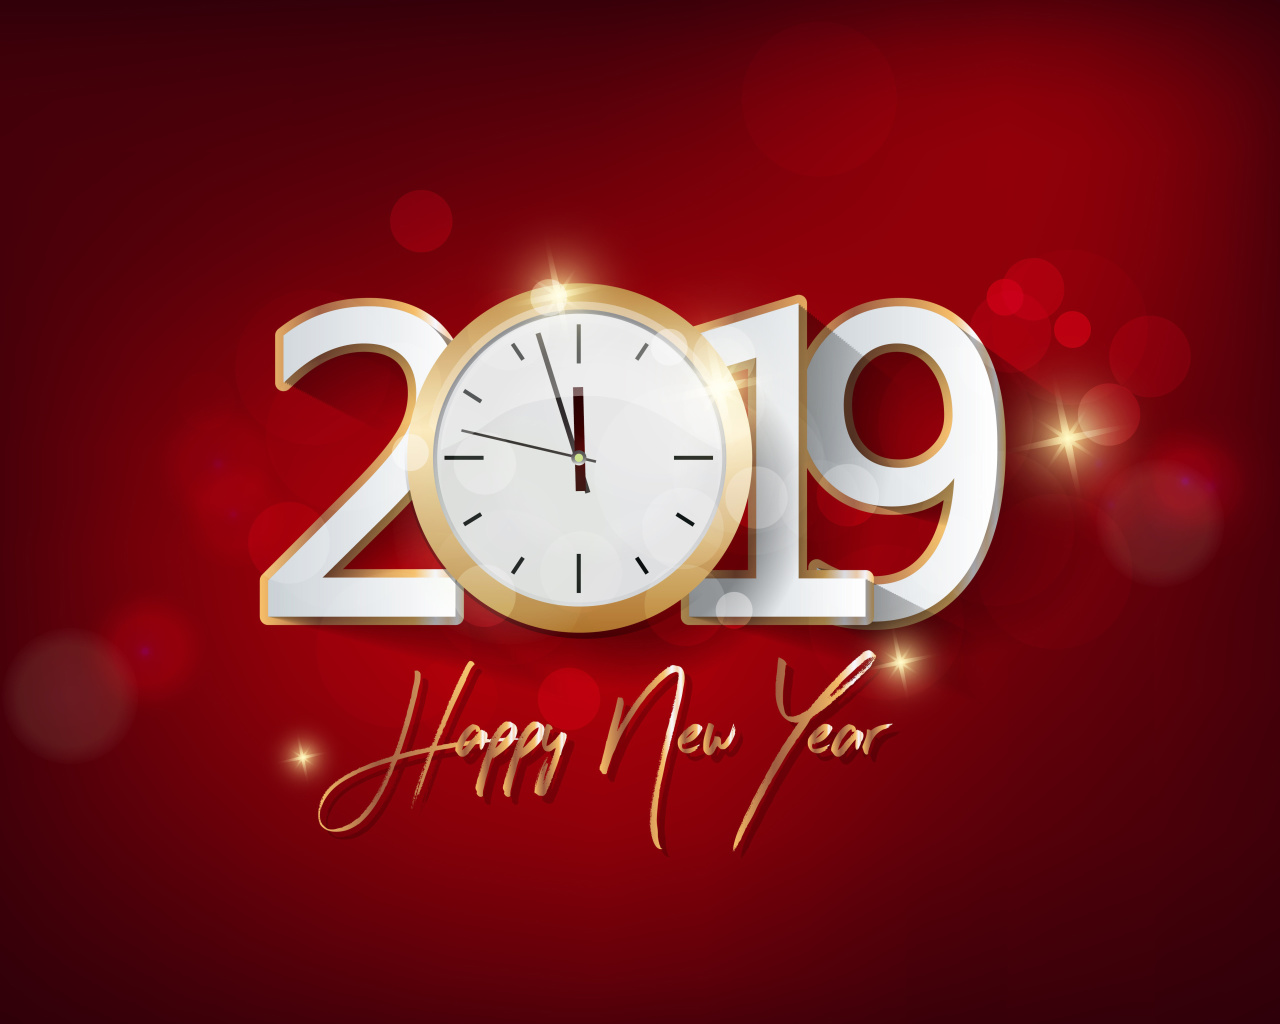 2019 New Year Festive Party wallpaper 1280x1024